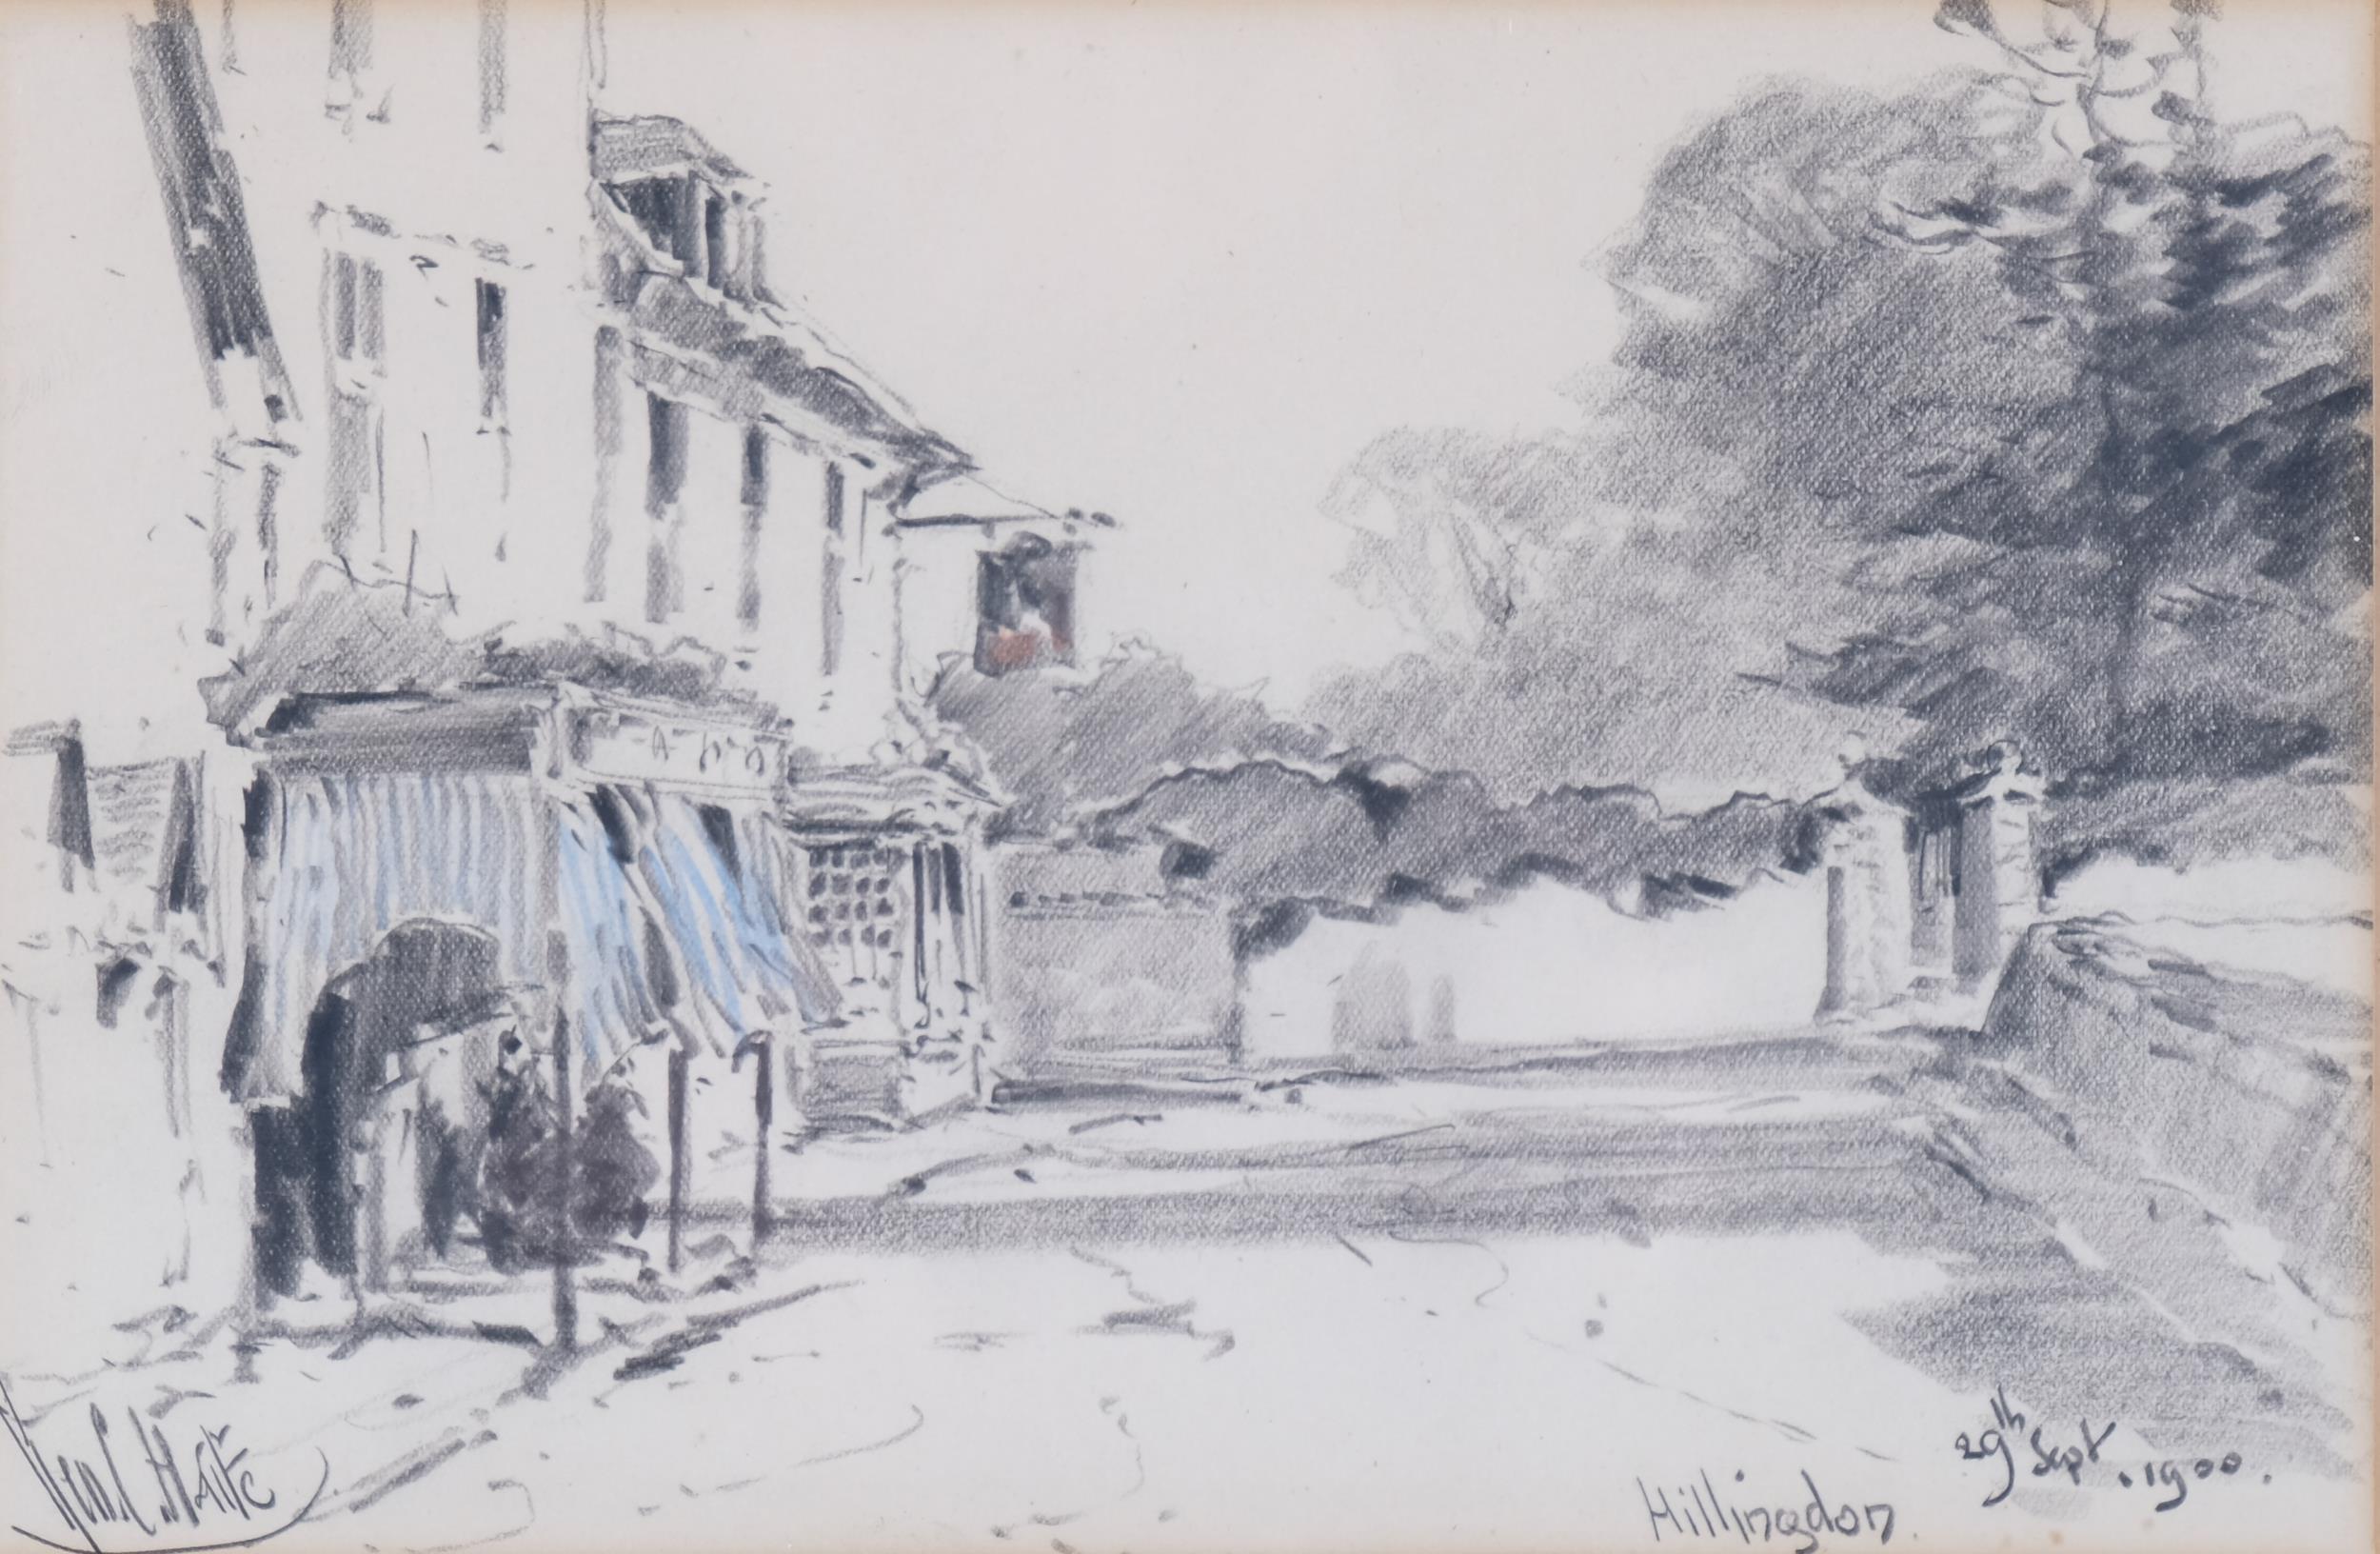 George Charles Haite, Hillingdon, charcoal/crayon, signed and dated 1900, 14cm x 22cm, framed Slight